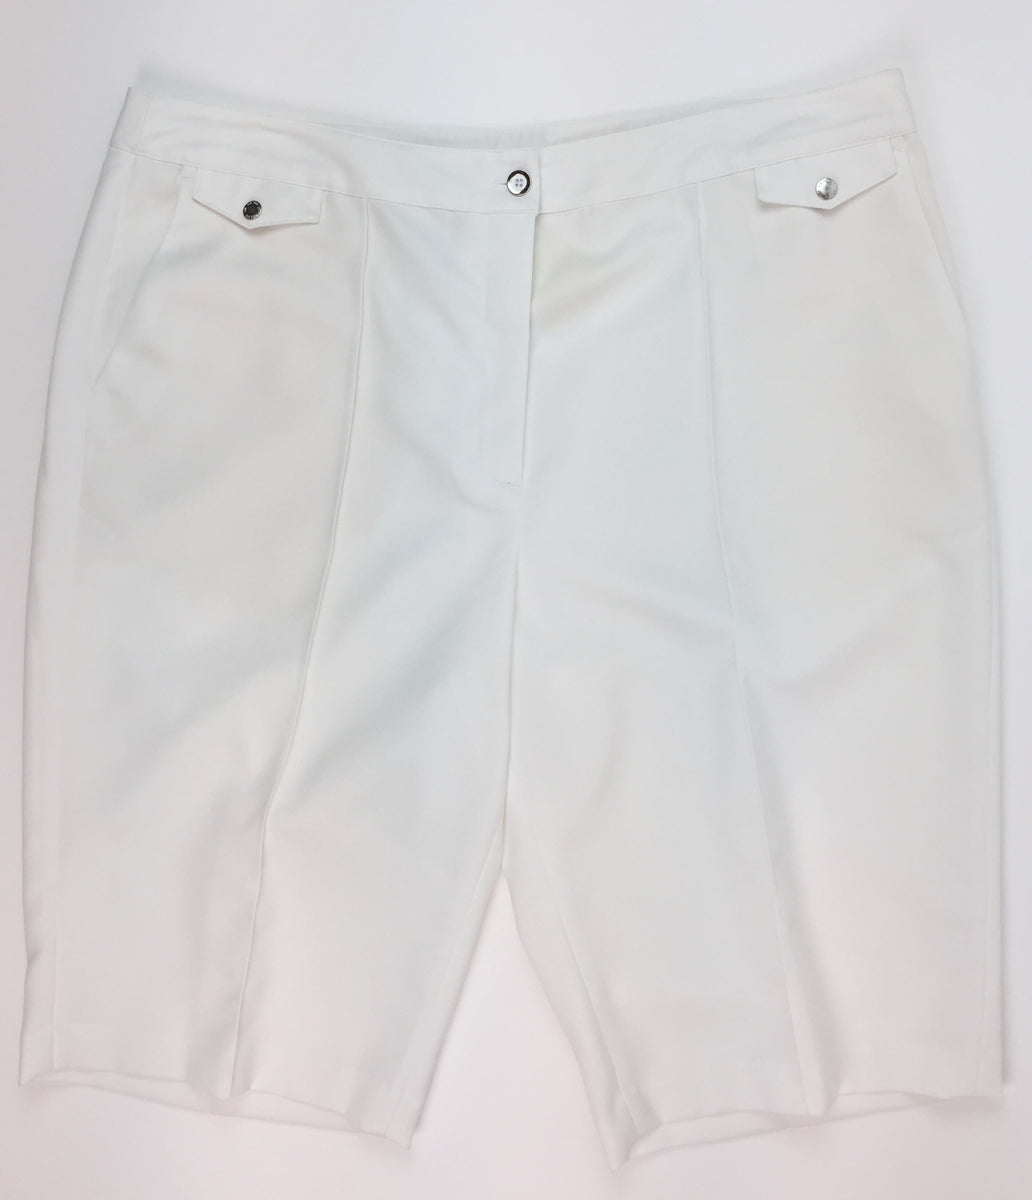 EP Pro White Golf Short – Peanuts and Golf